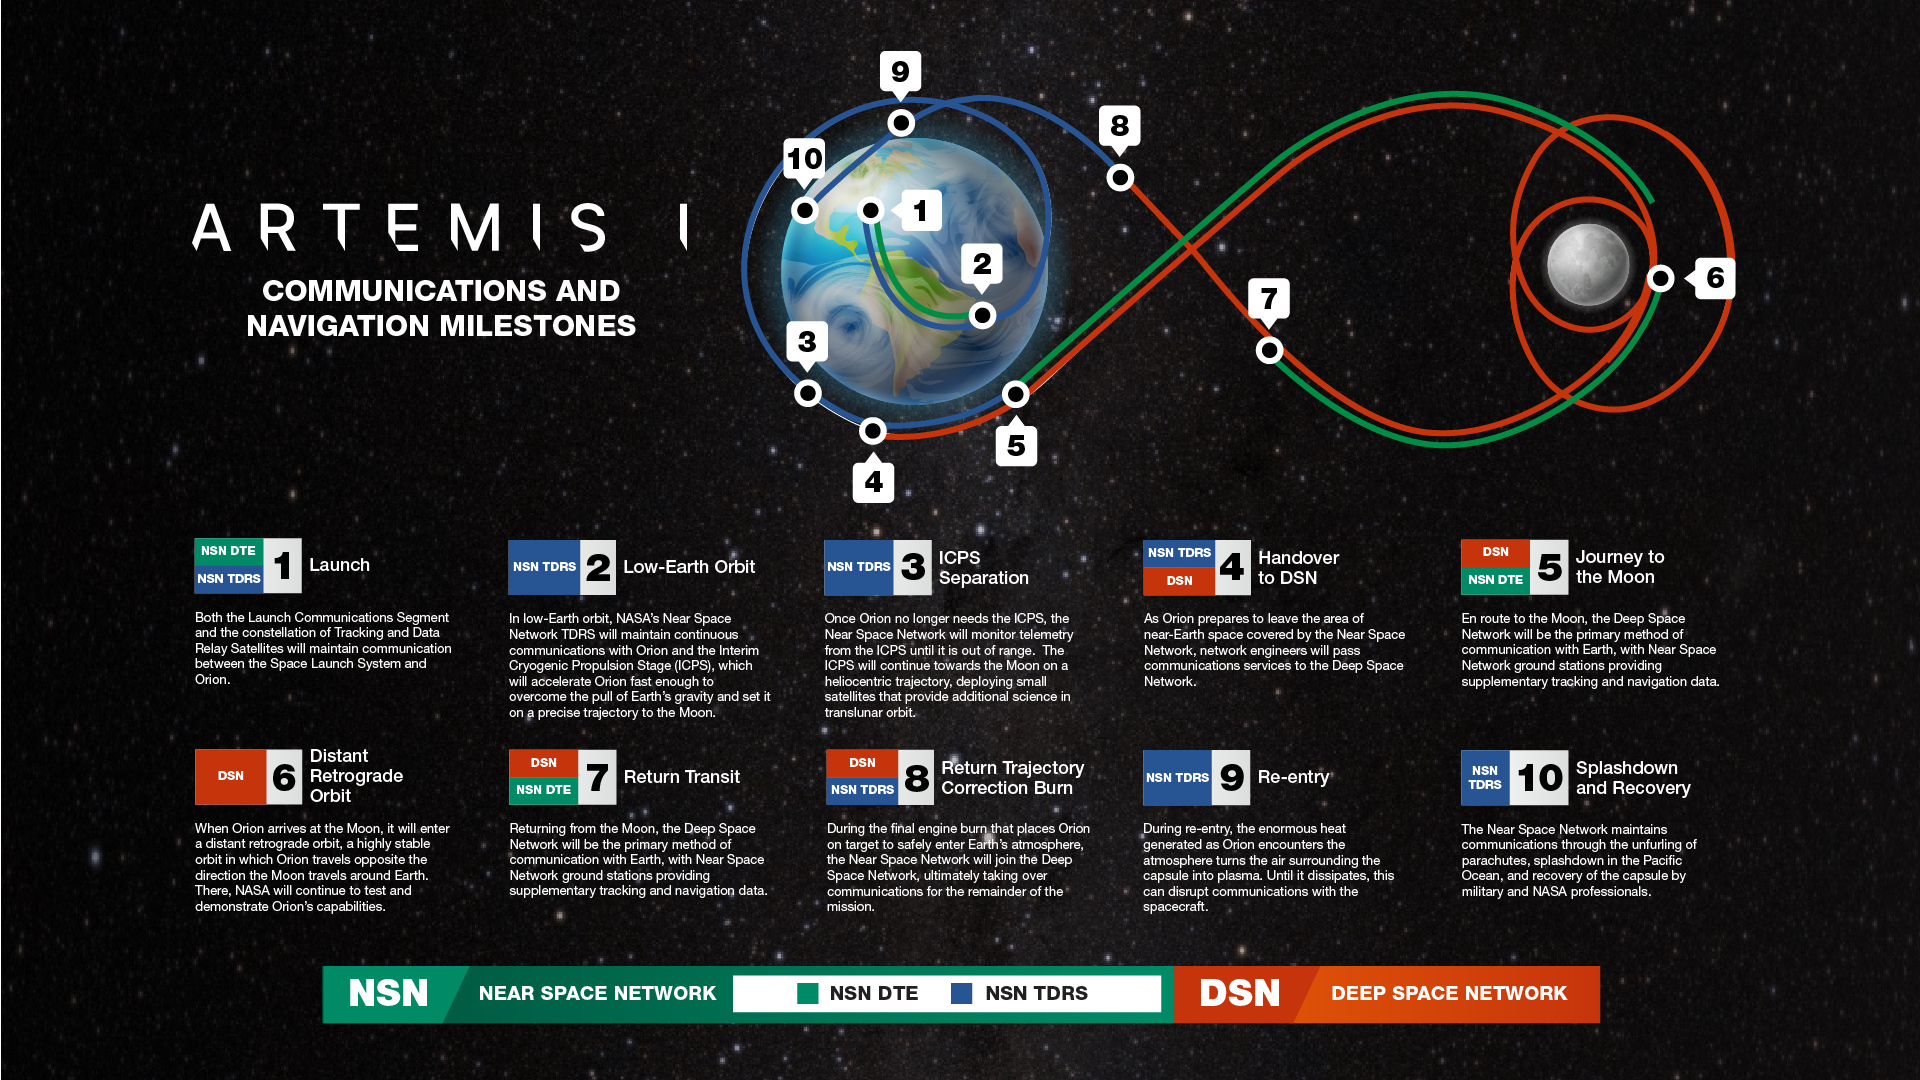 An infographic detailing services provided to the Artemis I moon missions by NASA's networks.Credits: NASA/Dave Ryan